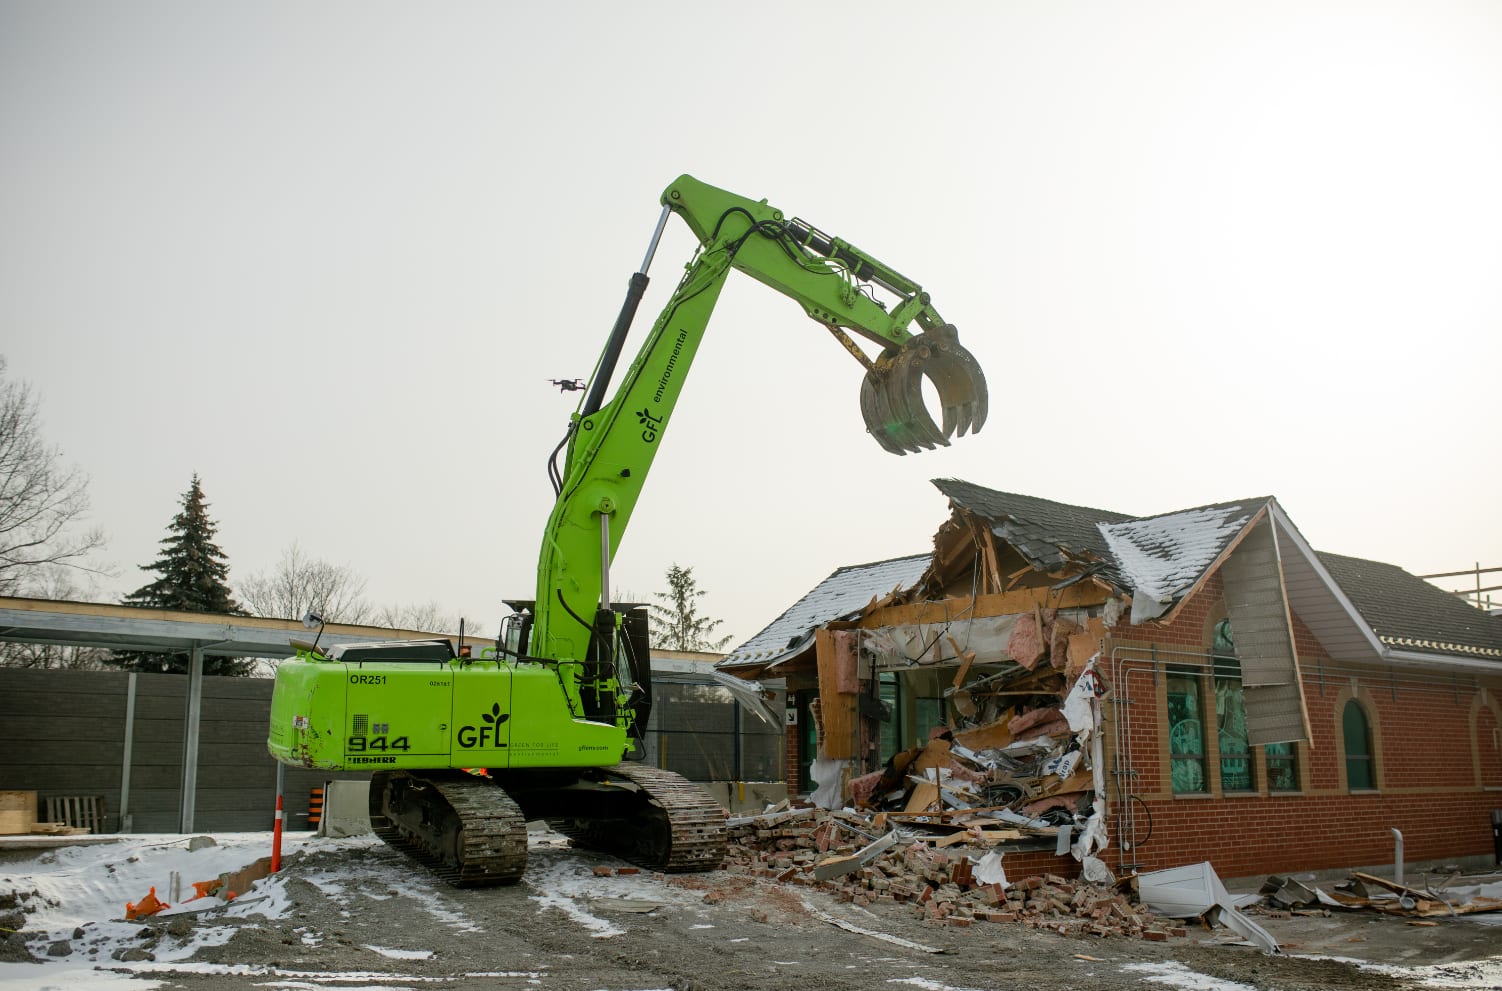 a large bulldozer in the process of demolishing the Agincourt GO station building